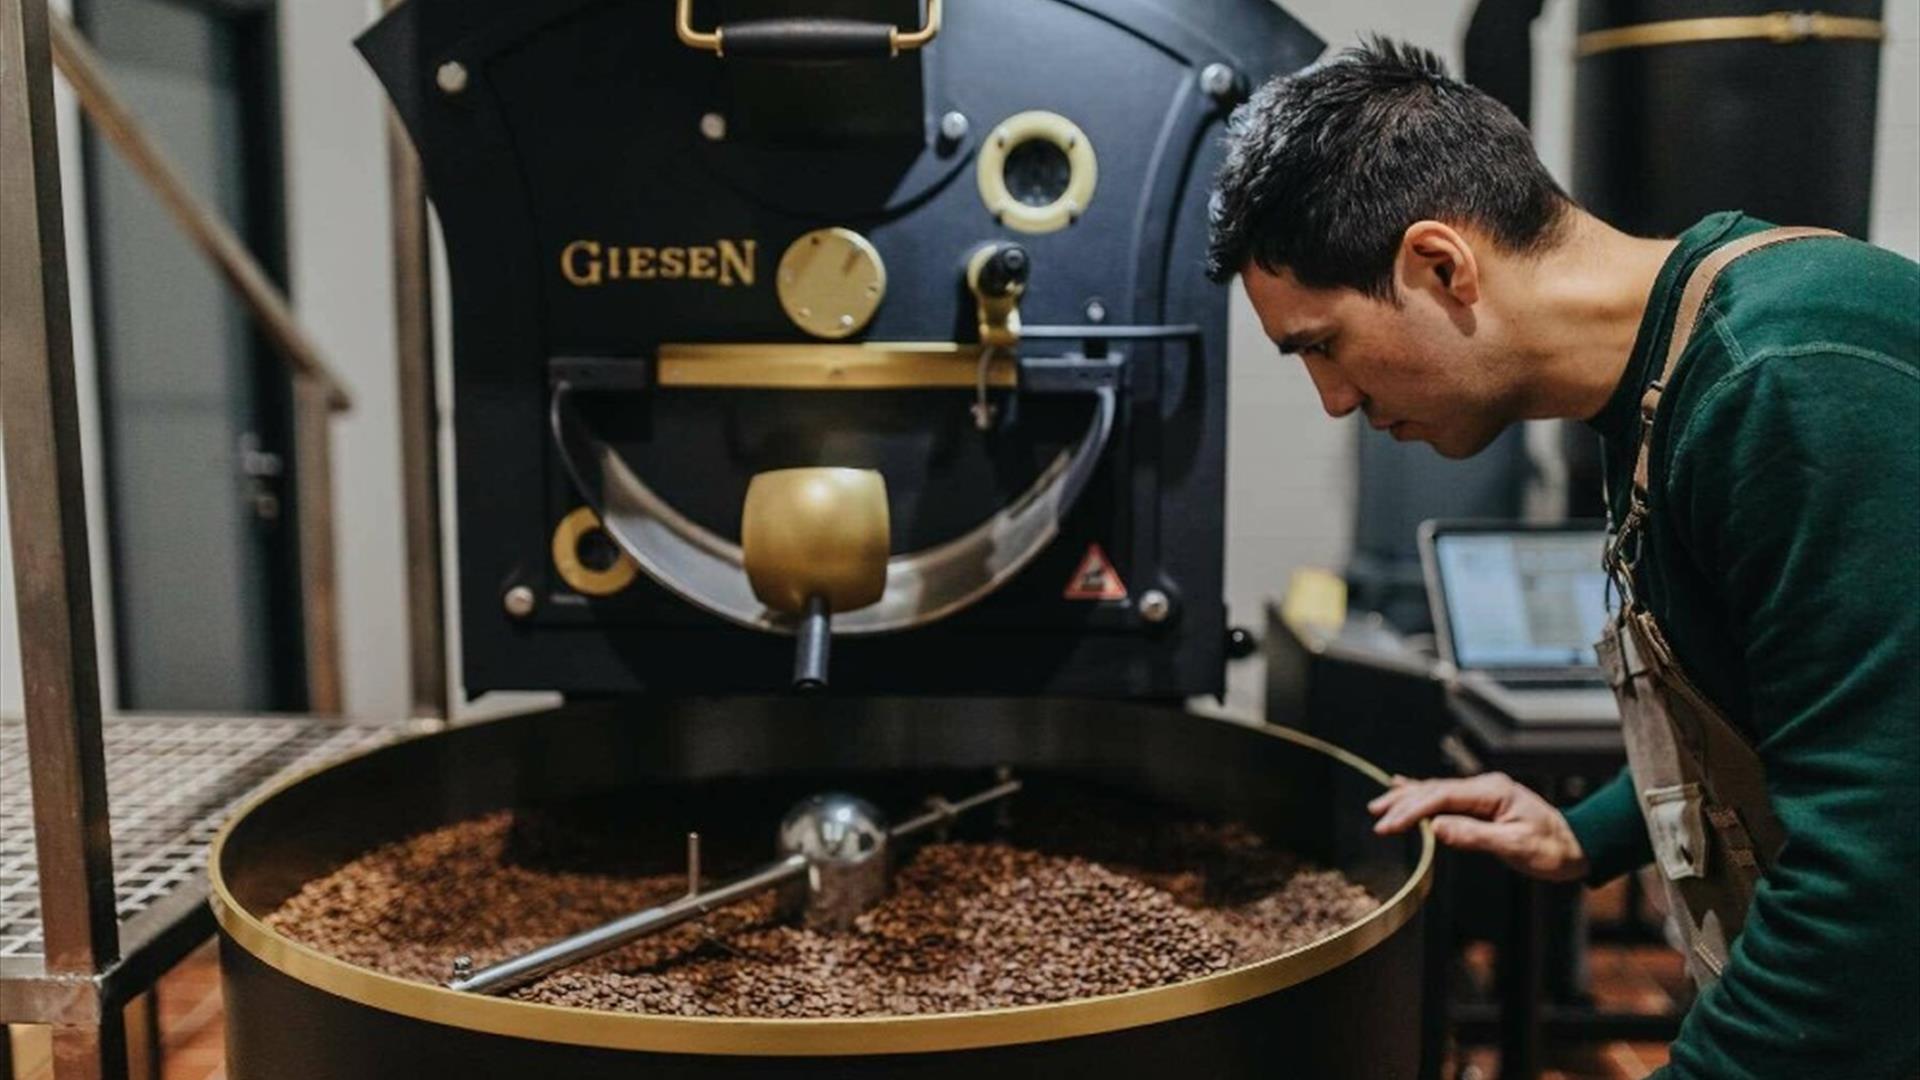 Man looking into the vat of roasted coffee beans